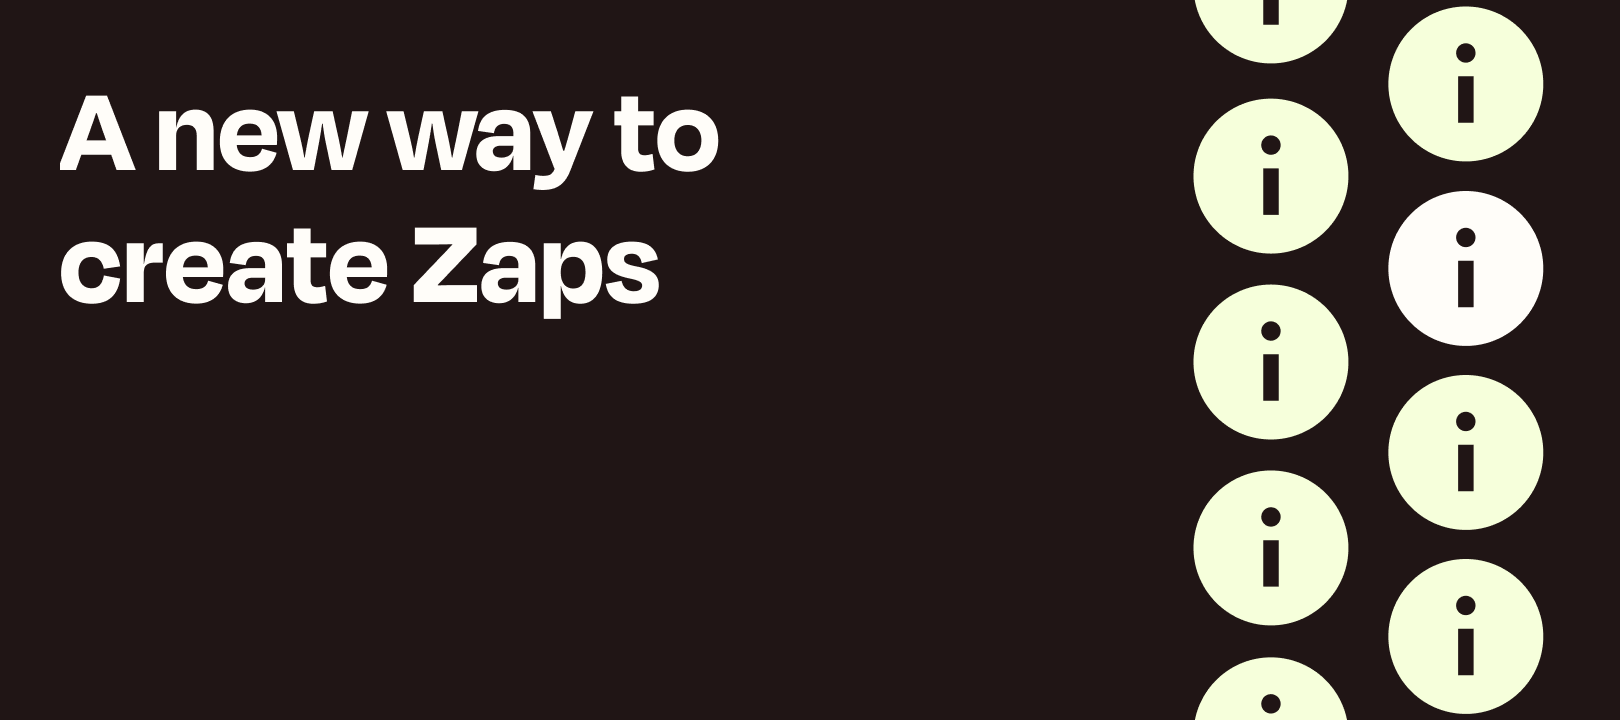 Creating a new Zap just got a whole lot easier